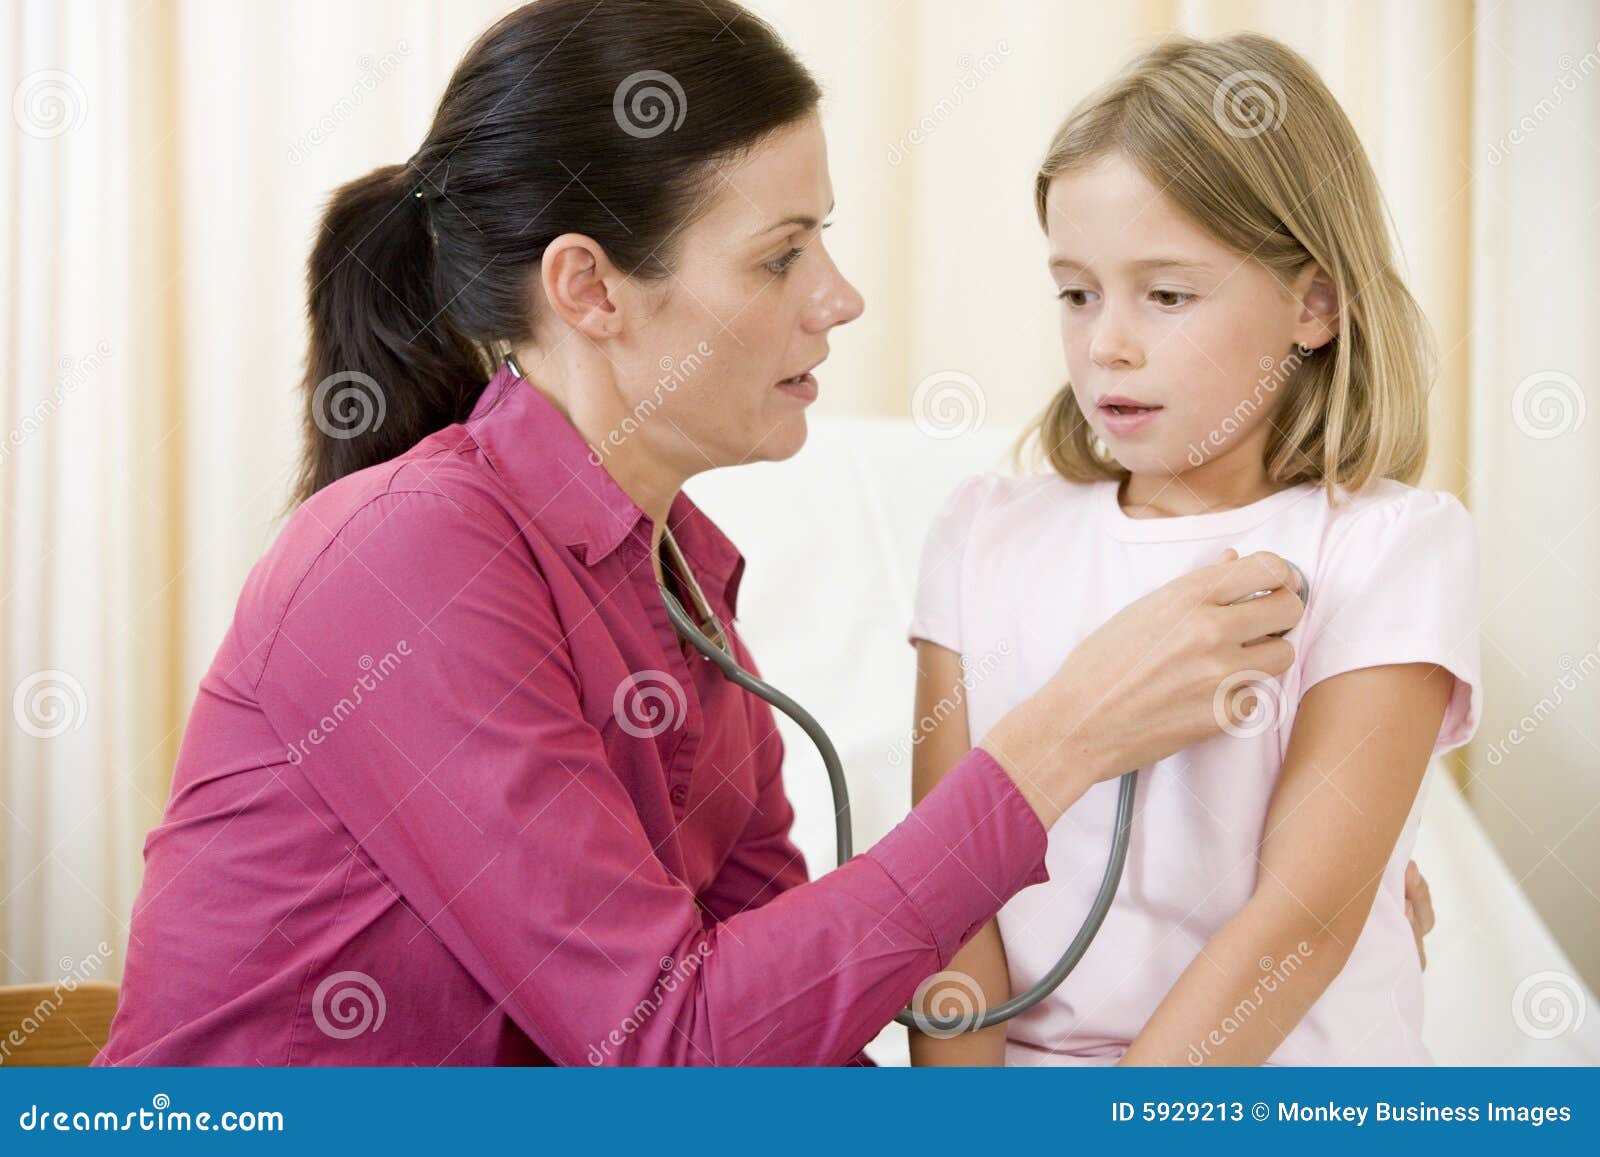 doctor giving checkup with stethoscope